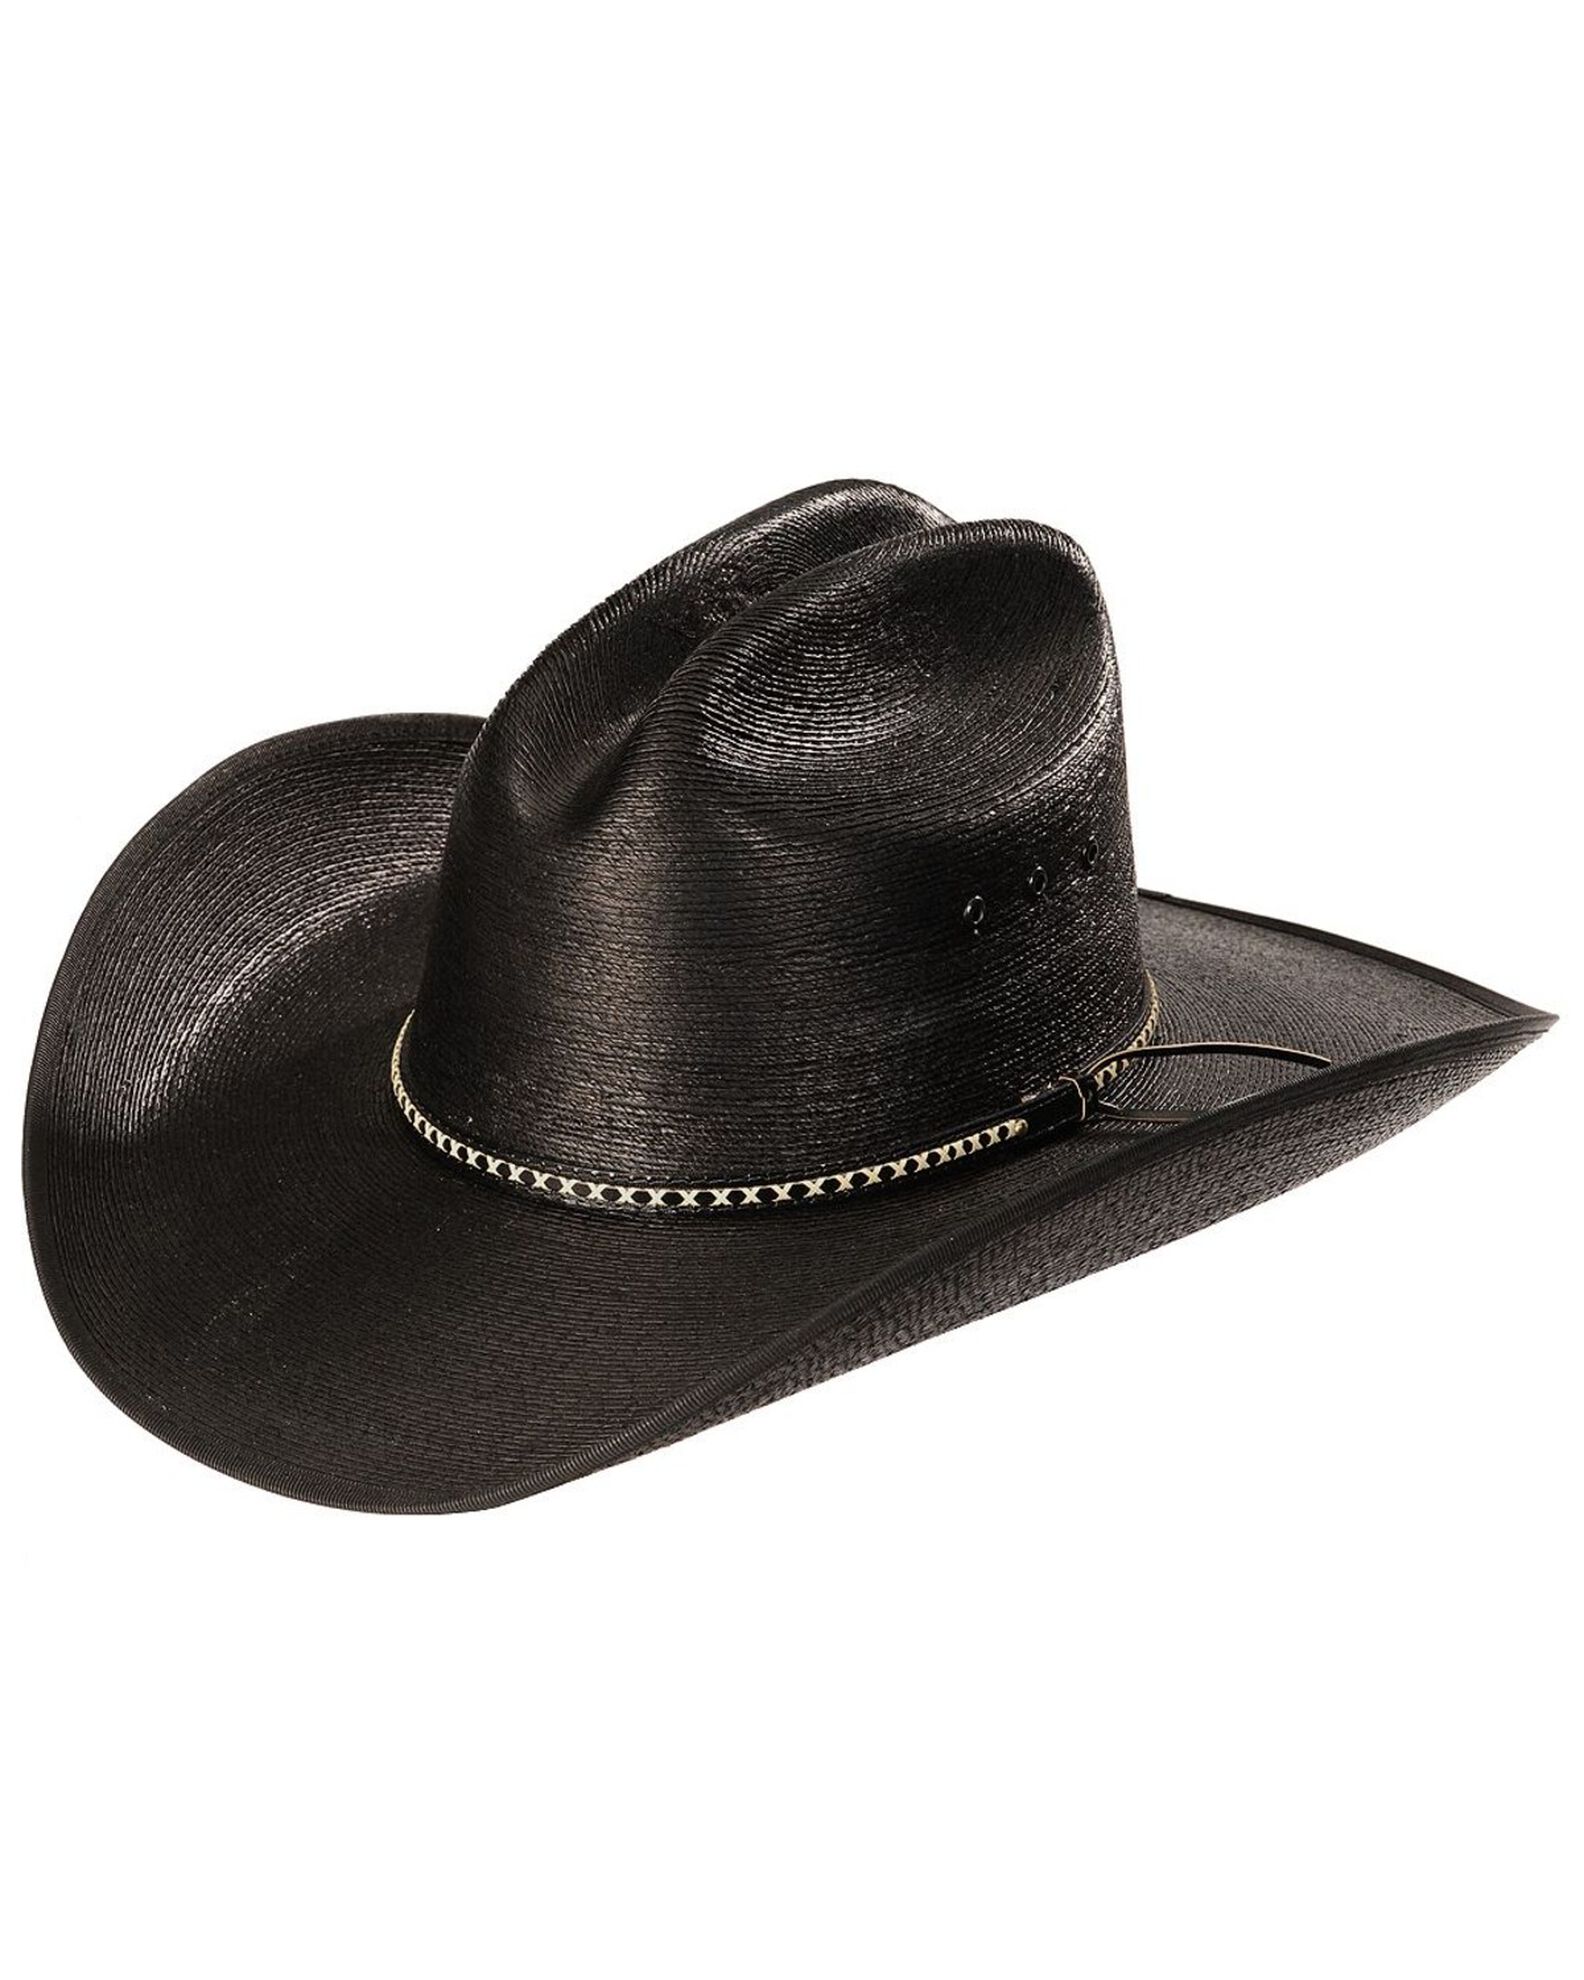 Boot Barn Black Hat Can